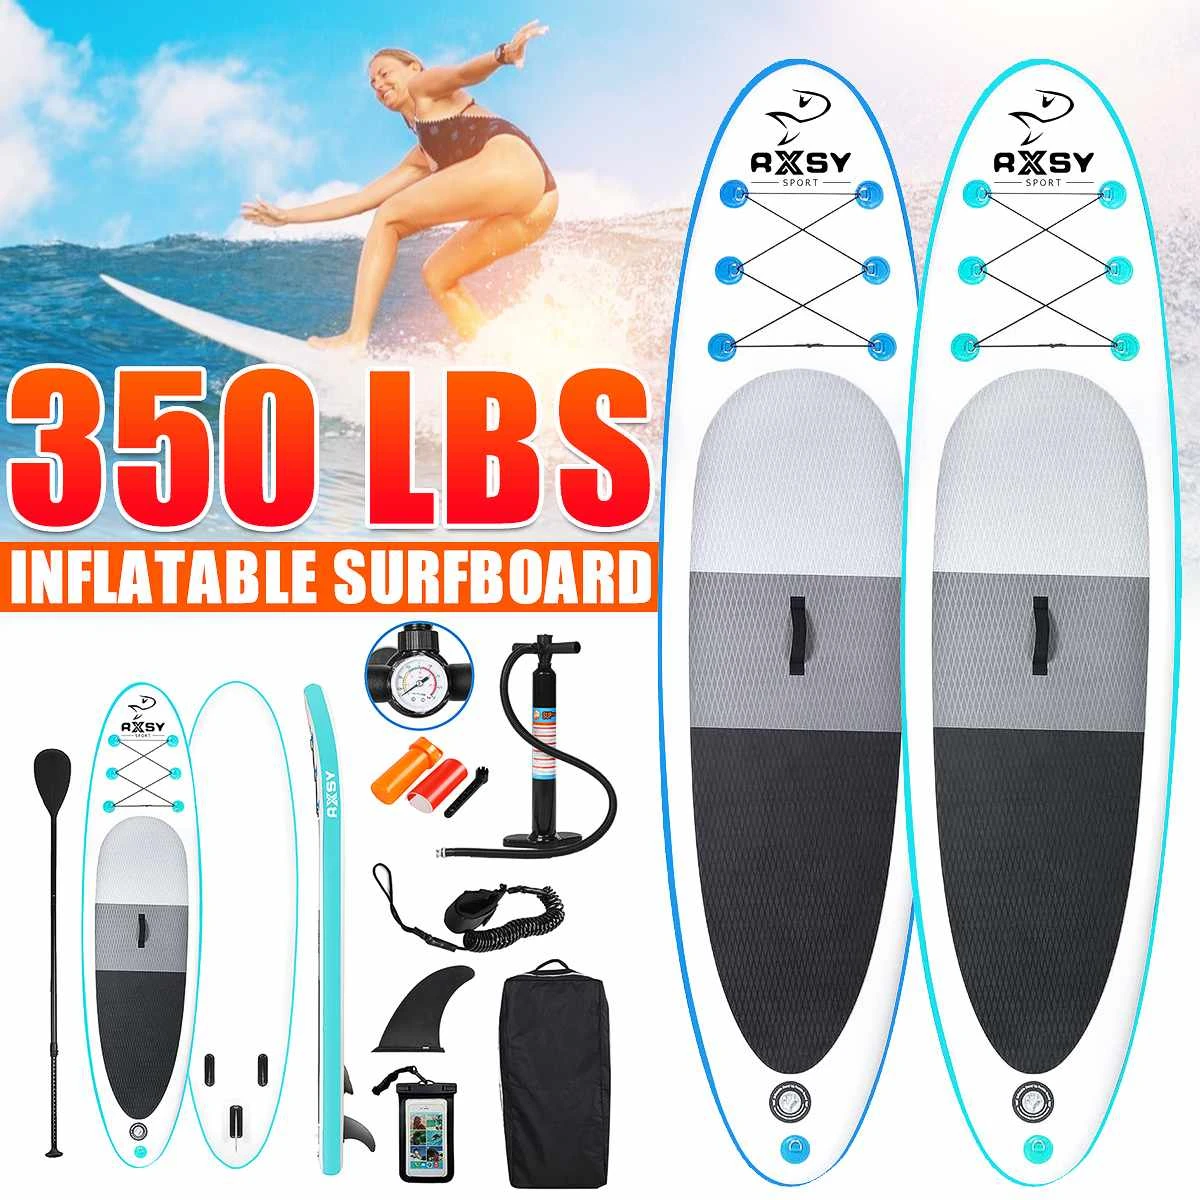 NEW SIZE 320*76*15cm inflatable surfboard Blue/Green 2021 up board surfing RXSY water sport board dinghy raft|Surfing| -